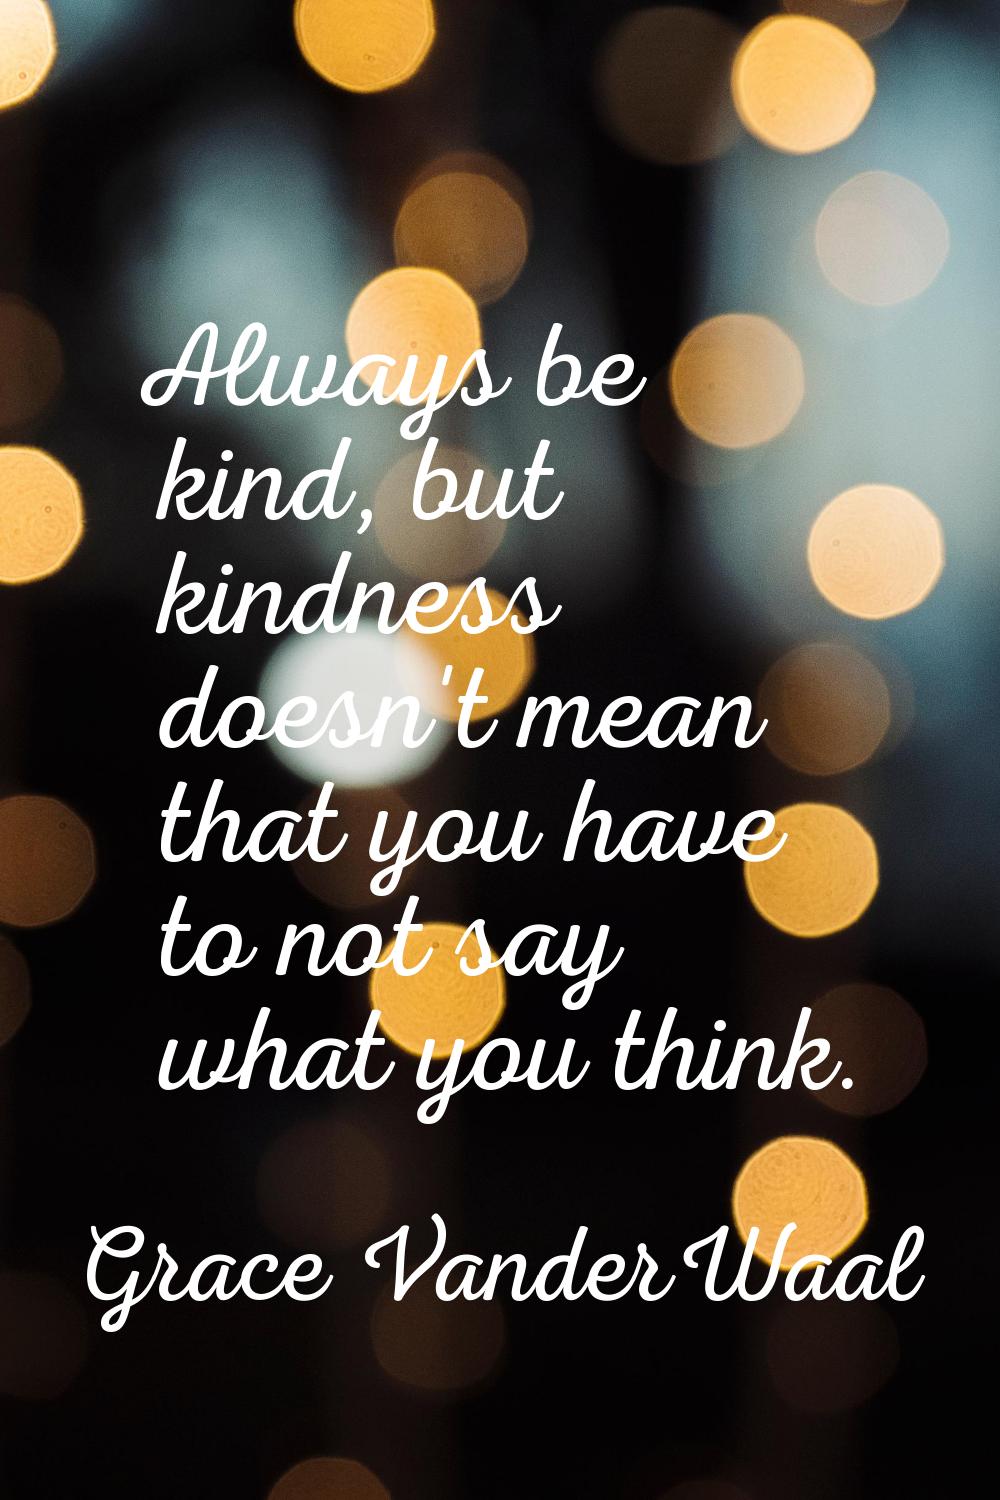 Always be kind, but kindness doesn't mean that you have to not say what you think.